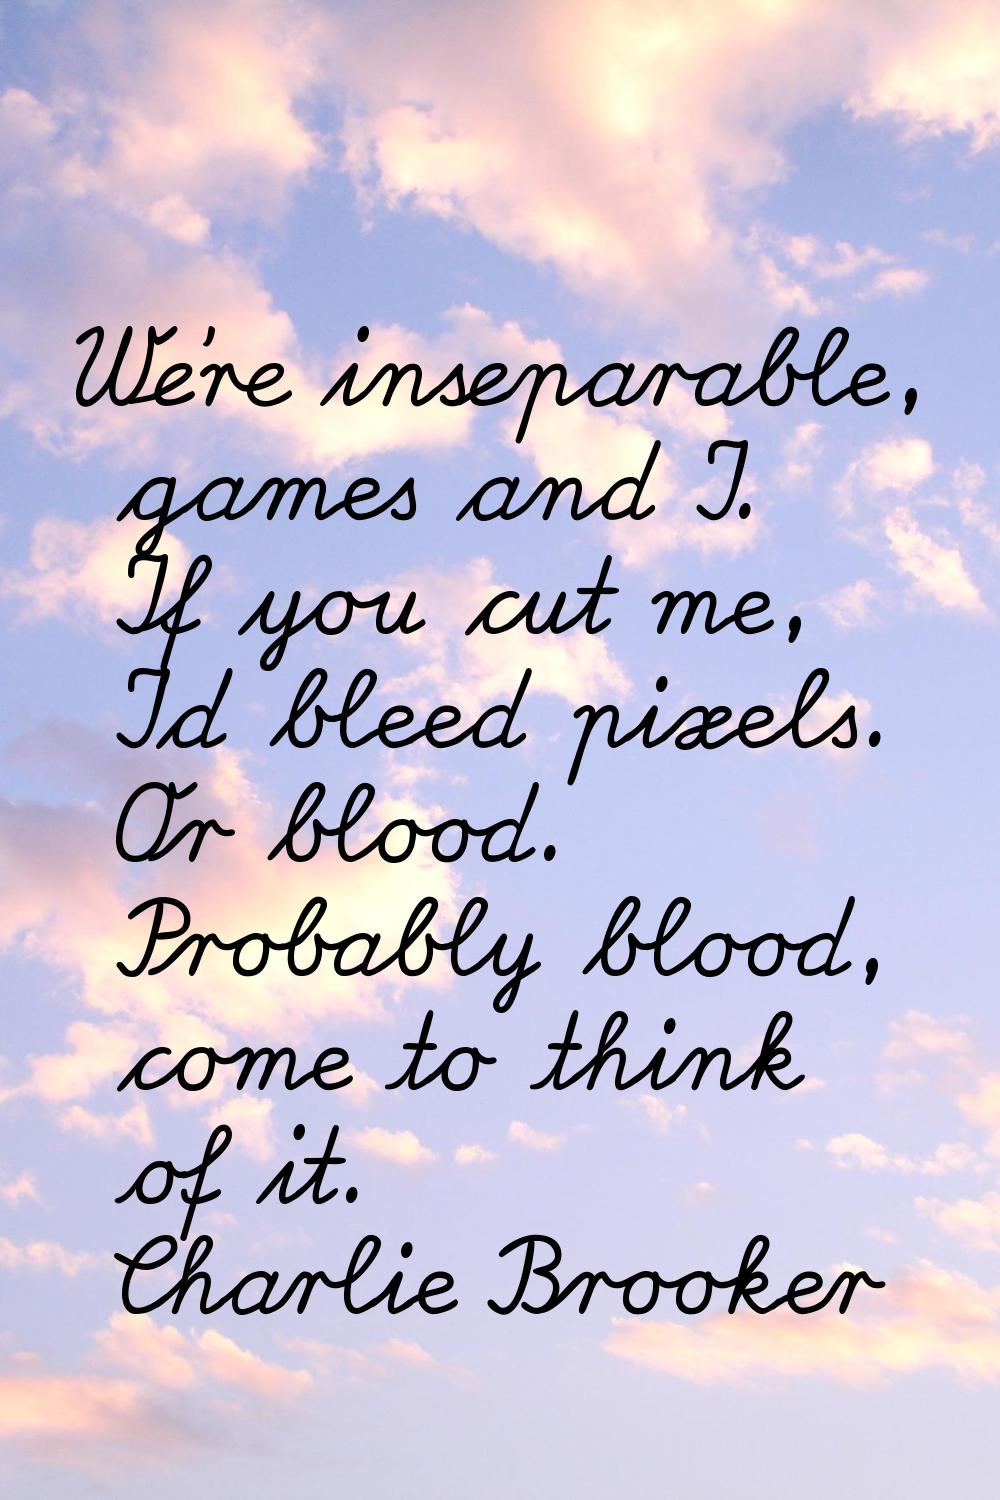 We're inseparable, games and I. If you cut me, I'd bleed pixels. Or blood. Probably blood, come to 